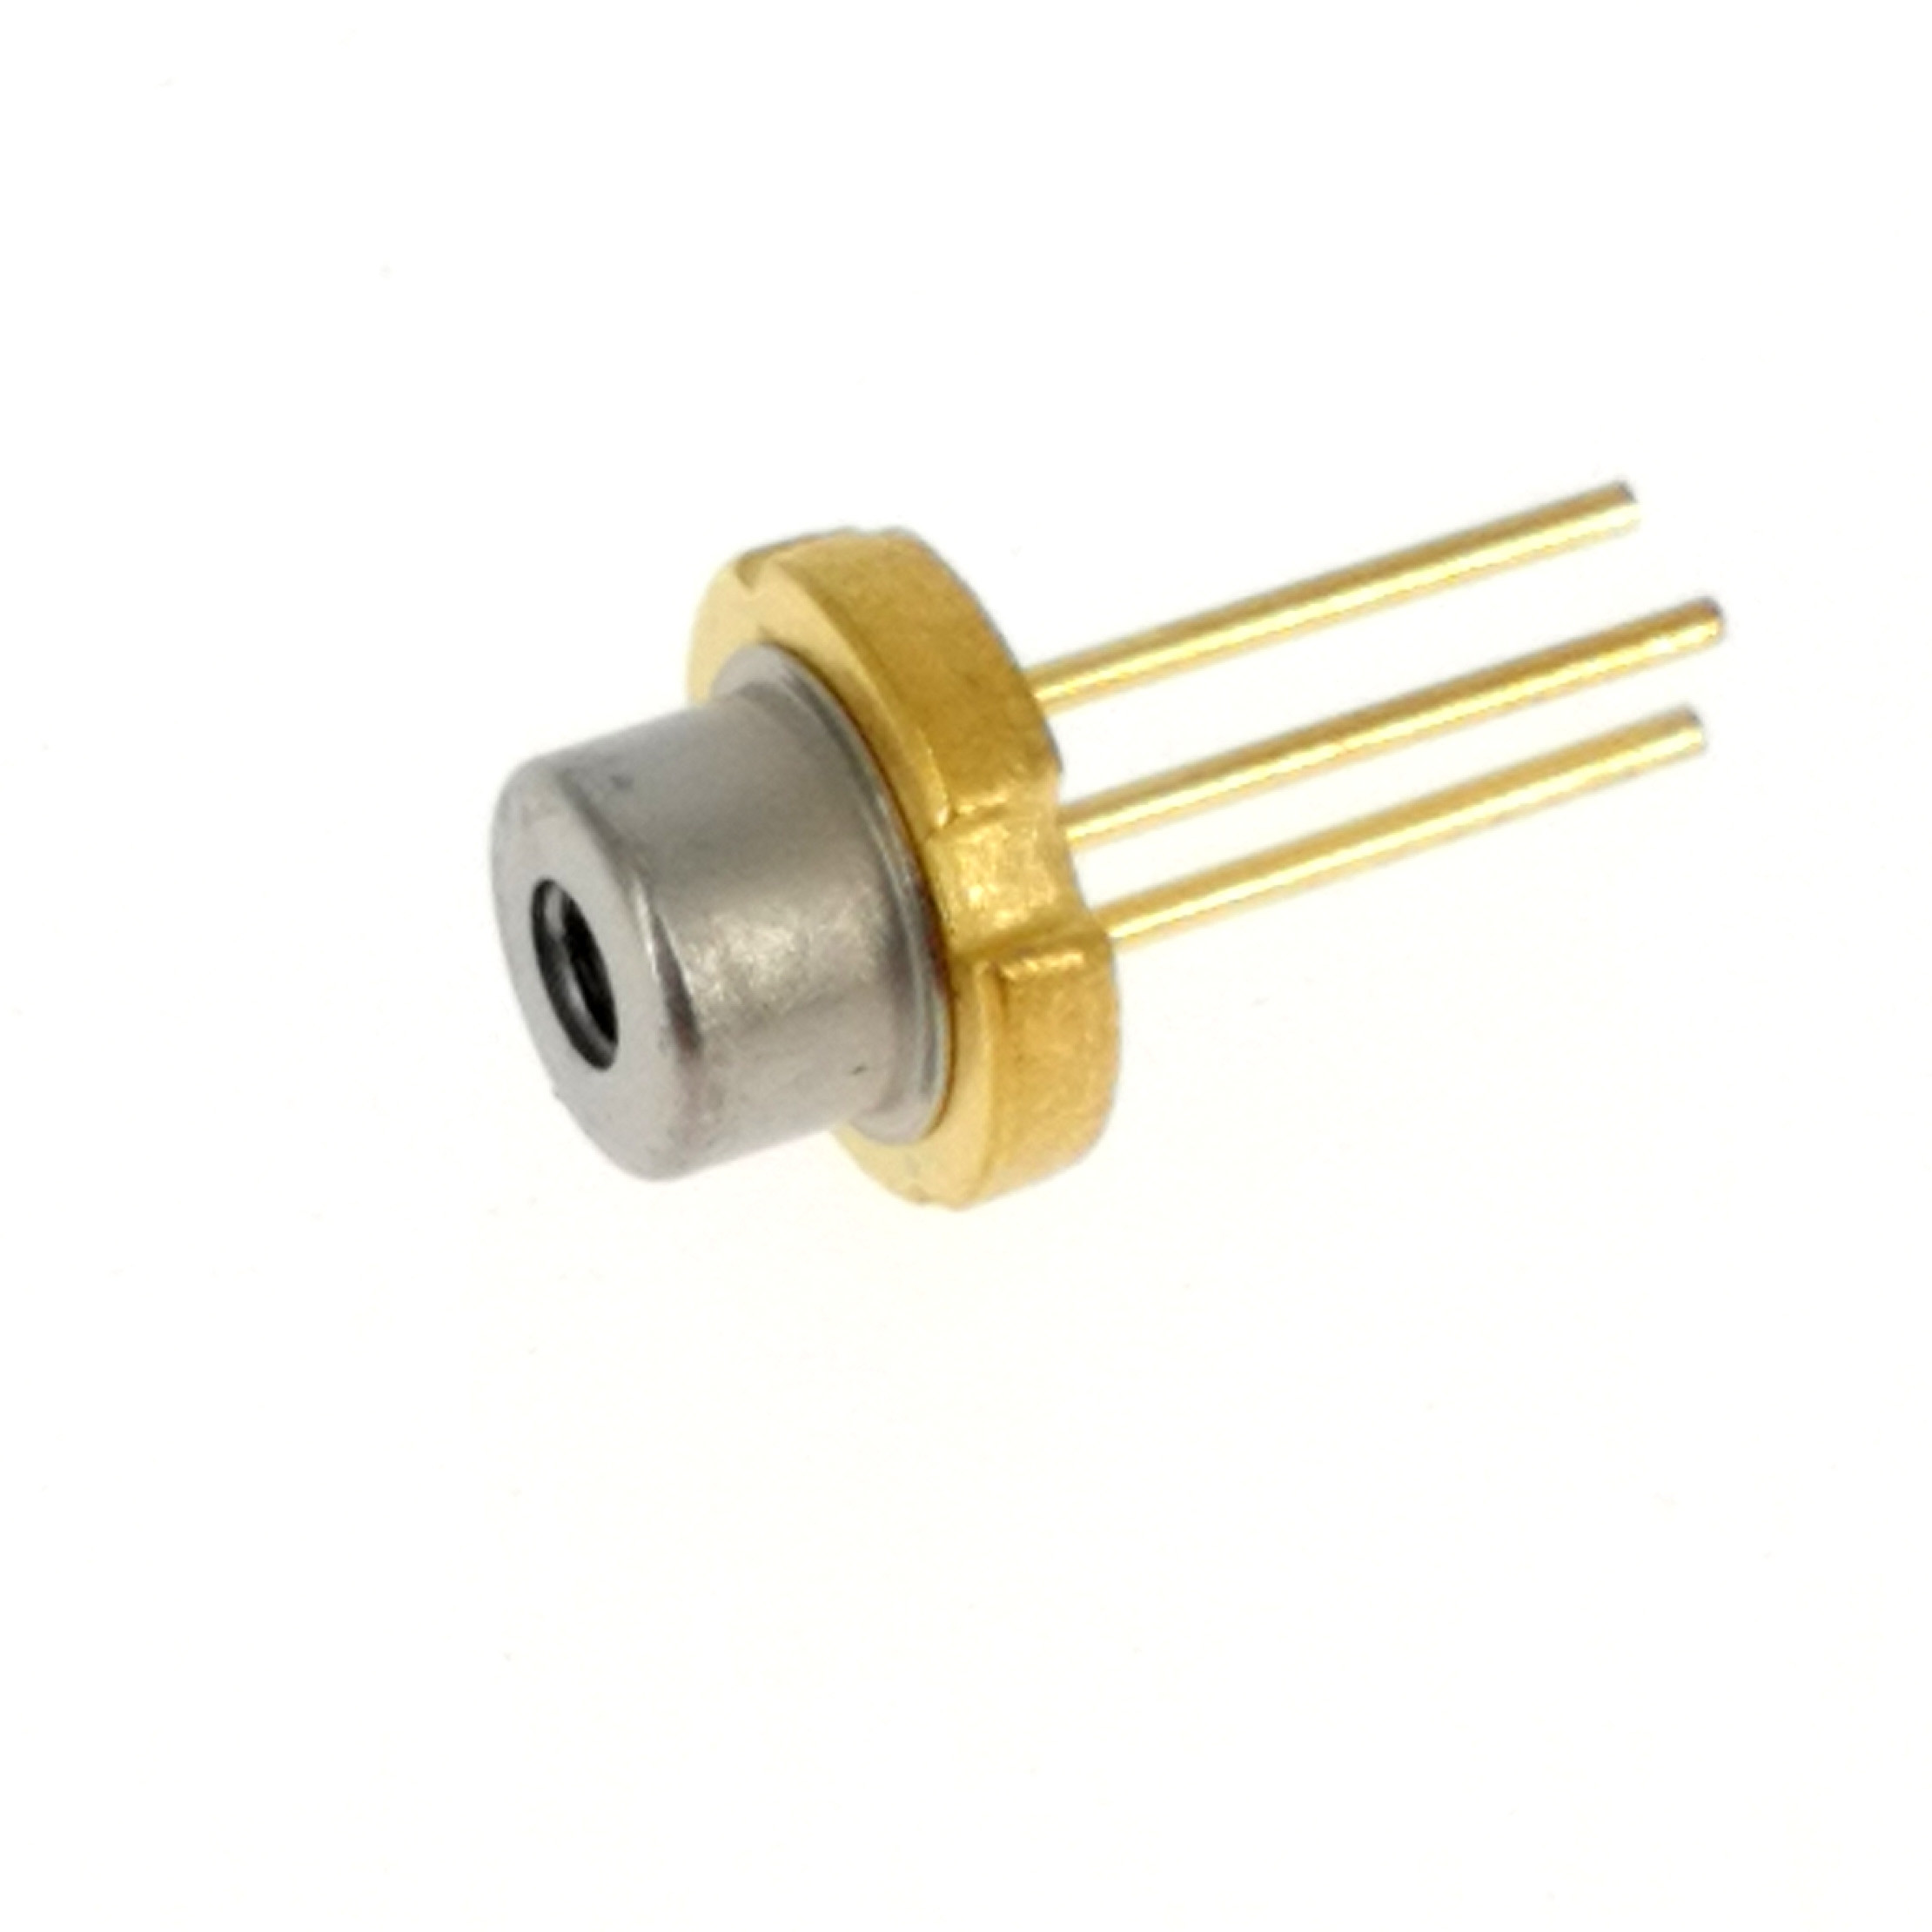 Pacific Islands Contribution whiskey Laserland 5.6mm 980nm 300mw No pd Infrared Laser Diode multi-mode - 905nm- 980nm Laser Diode - Laser Diode